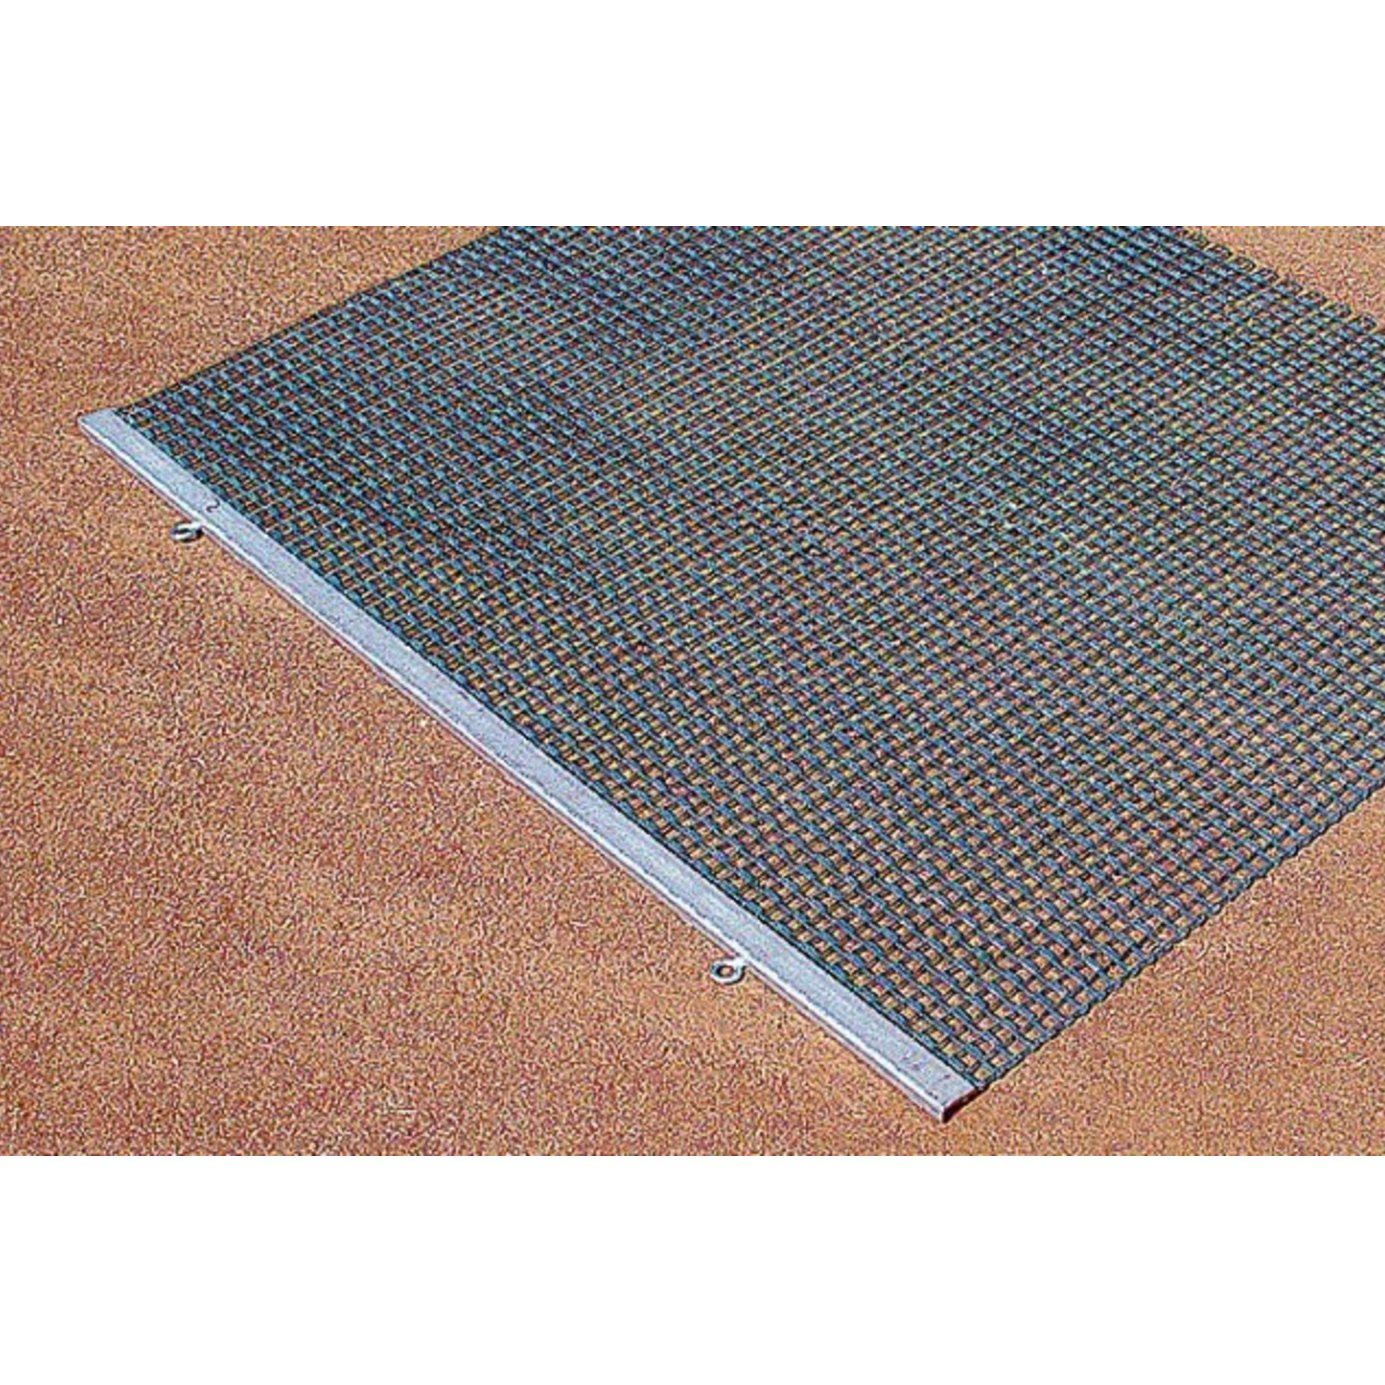 6' x 4' Steel Drag Mat with Drag Bar - Pitch Pro Direct